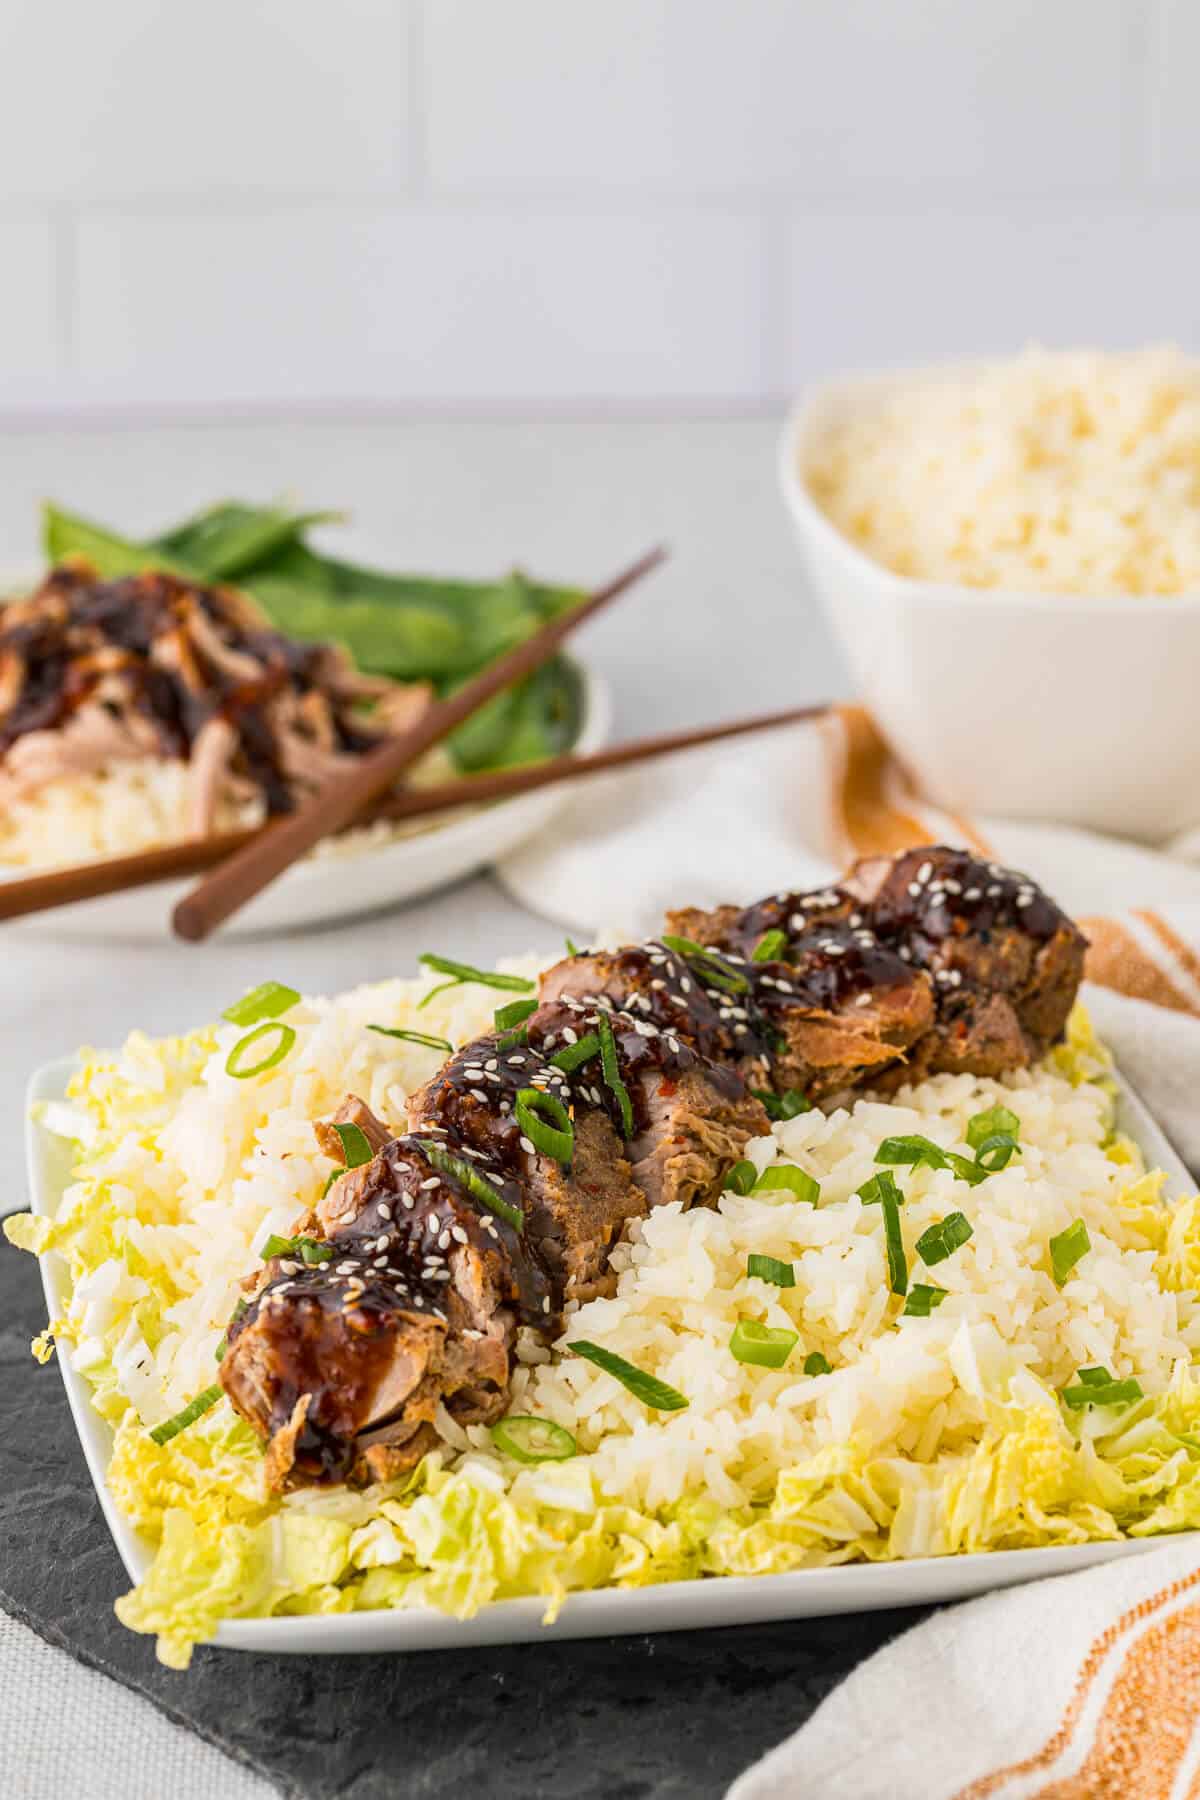 Asian pork tenderloin sliced on a bed of rice and cabbage.